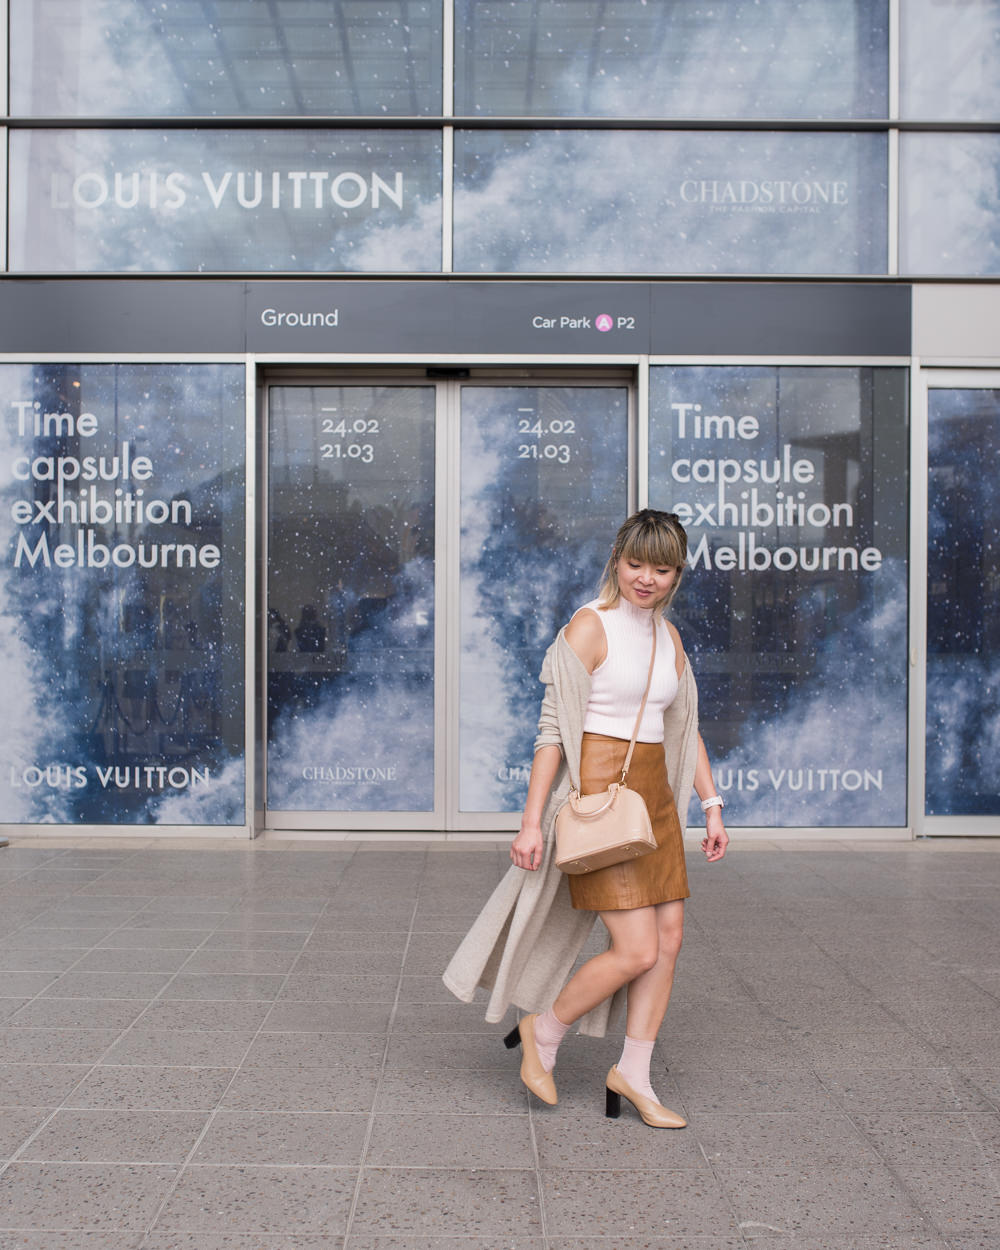 84 New Louis Vuitton Store Opens At Chadstone Stock Photos, High